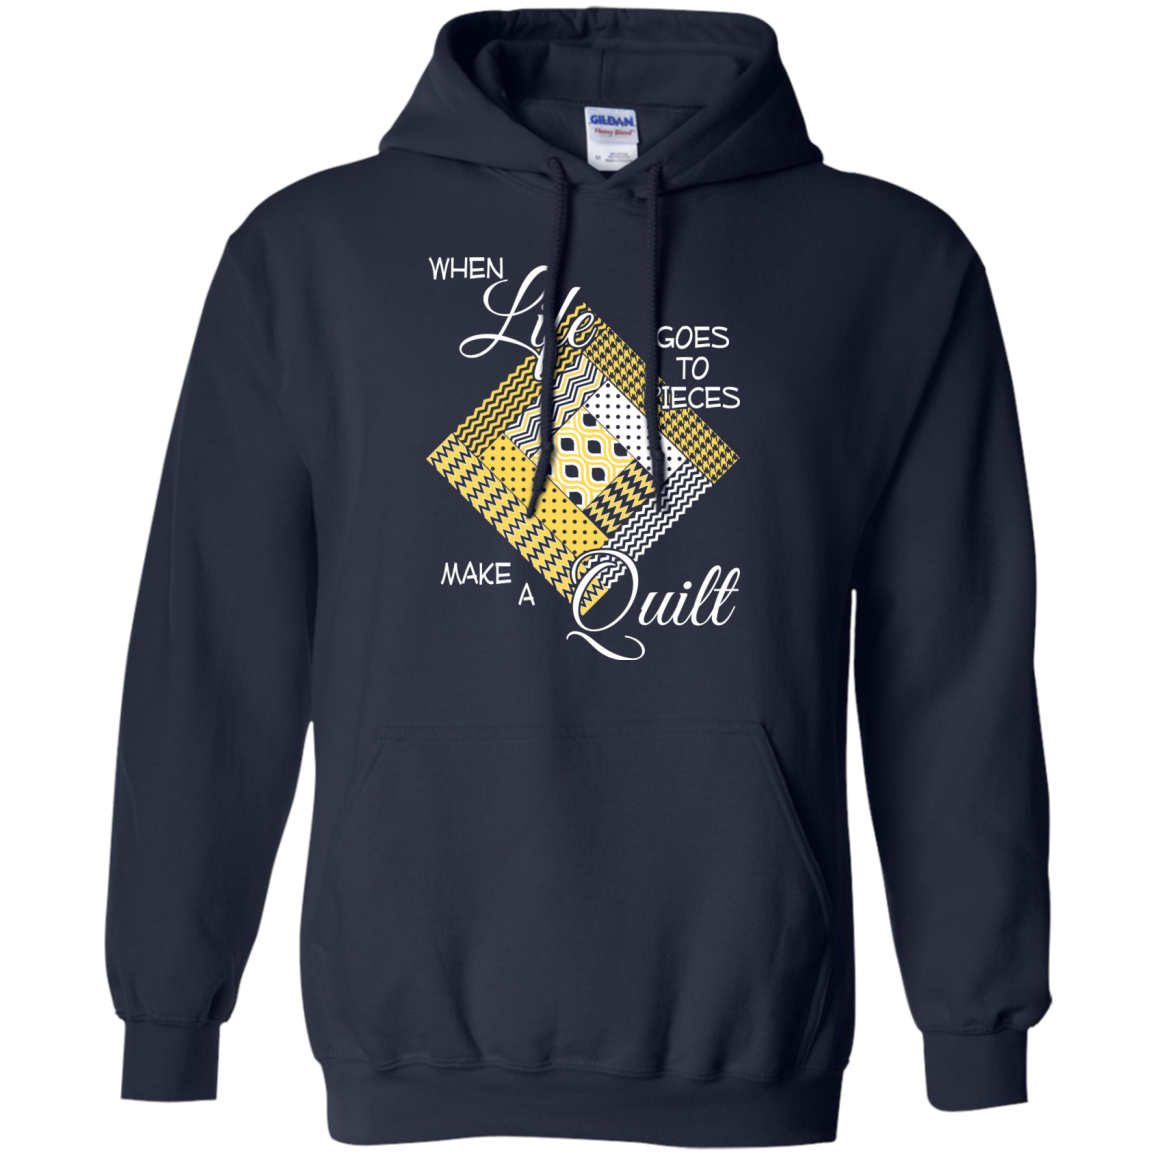 Make a Quilt (yellow) Pullover Hoodies - Crafter4Life - 1